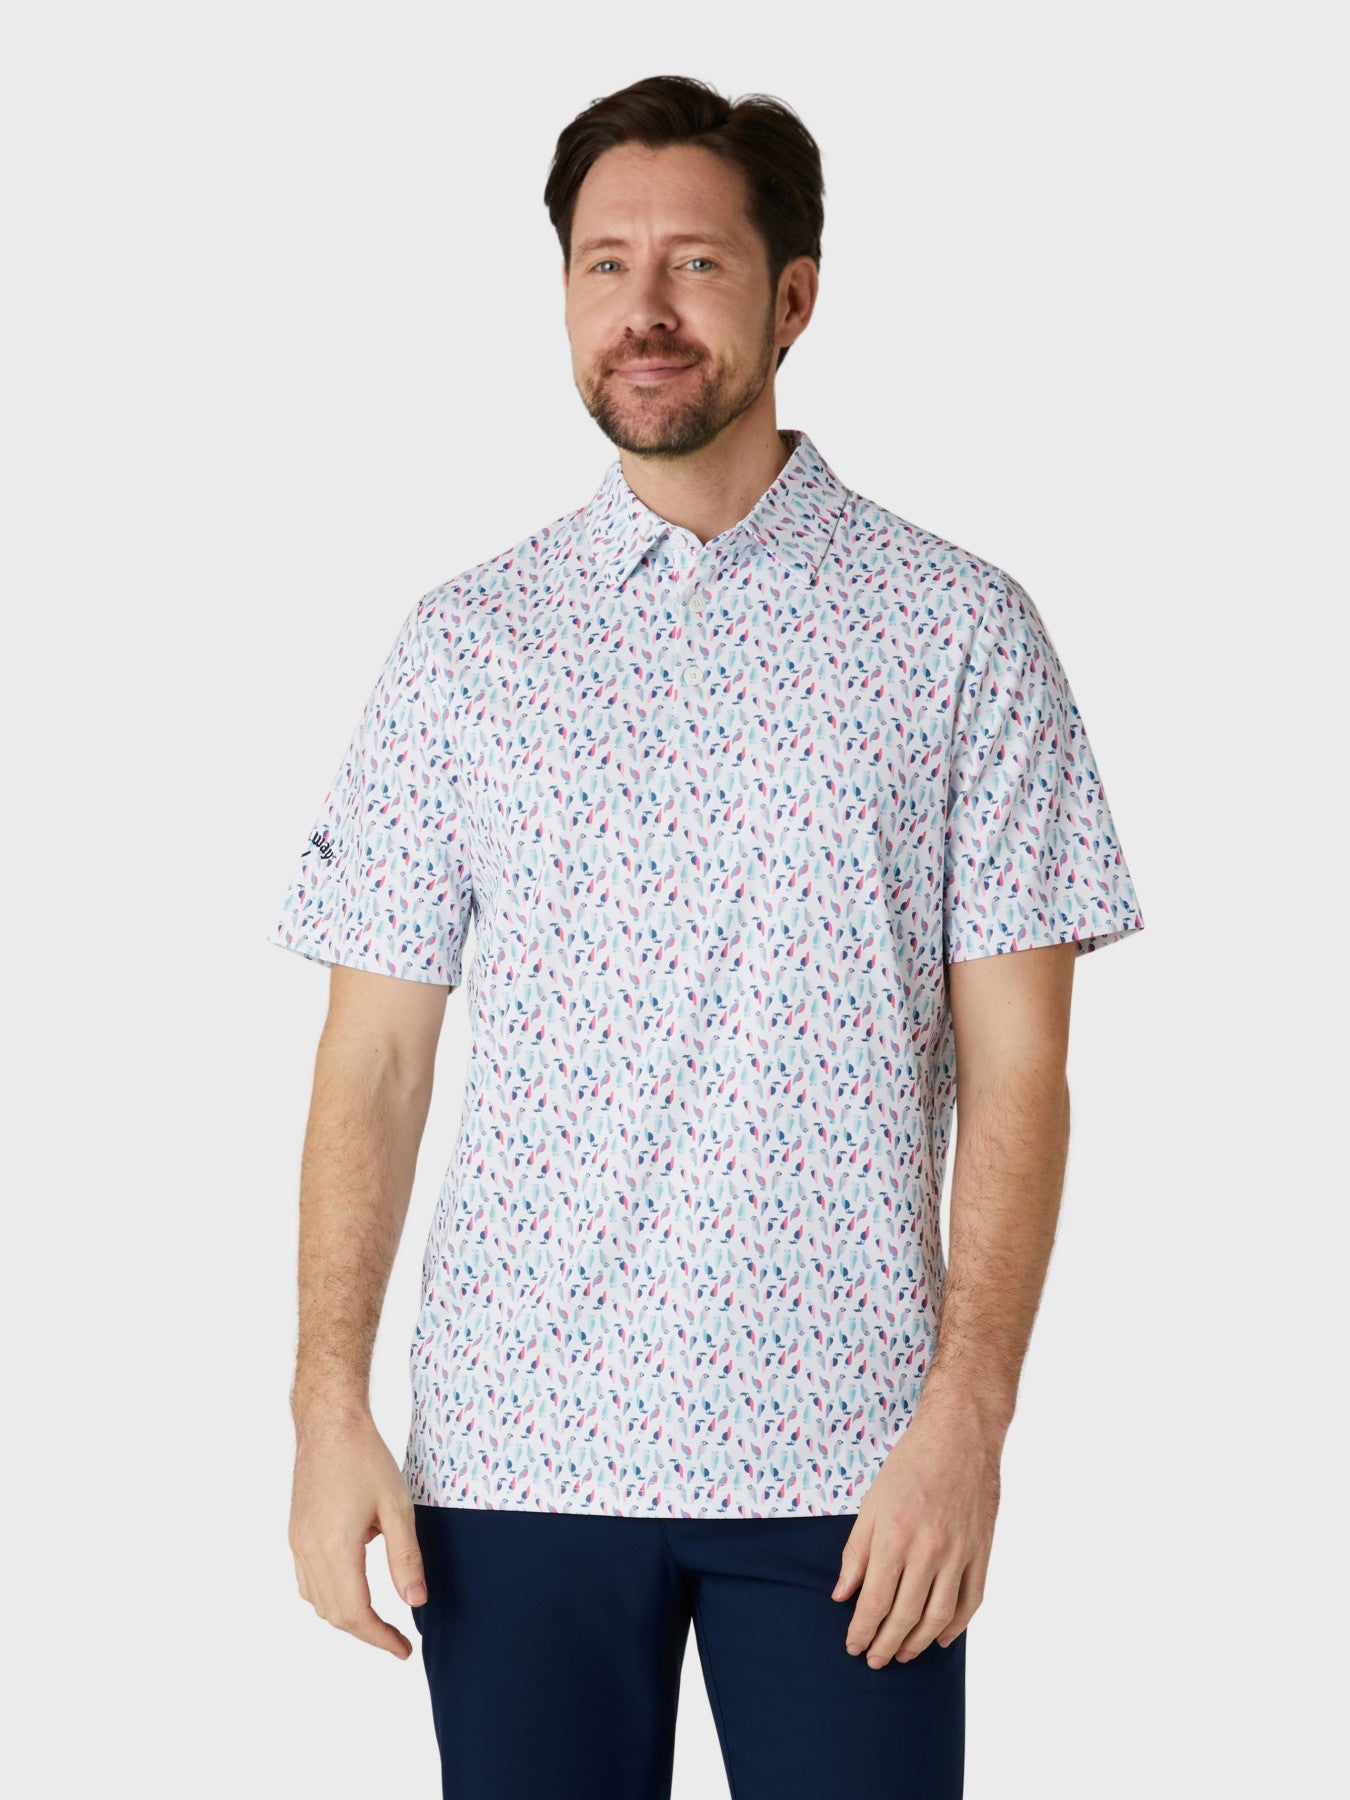 View Short Sleeve Chev All Over Eagle Print Polo Shirt In Bright White information